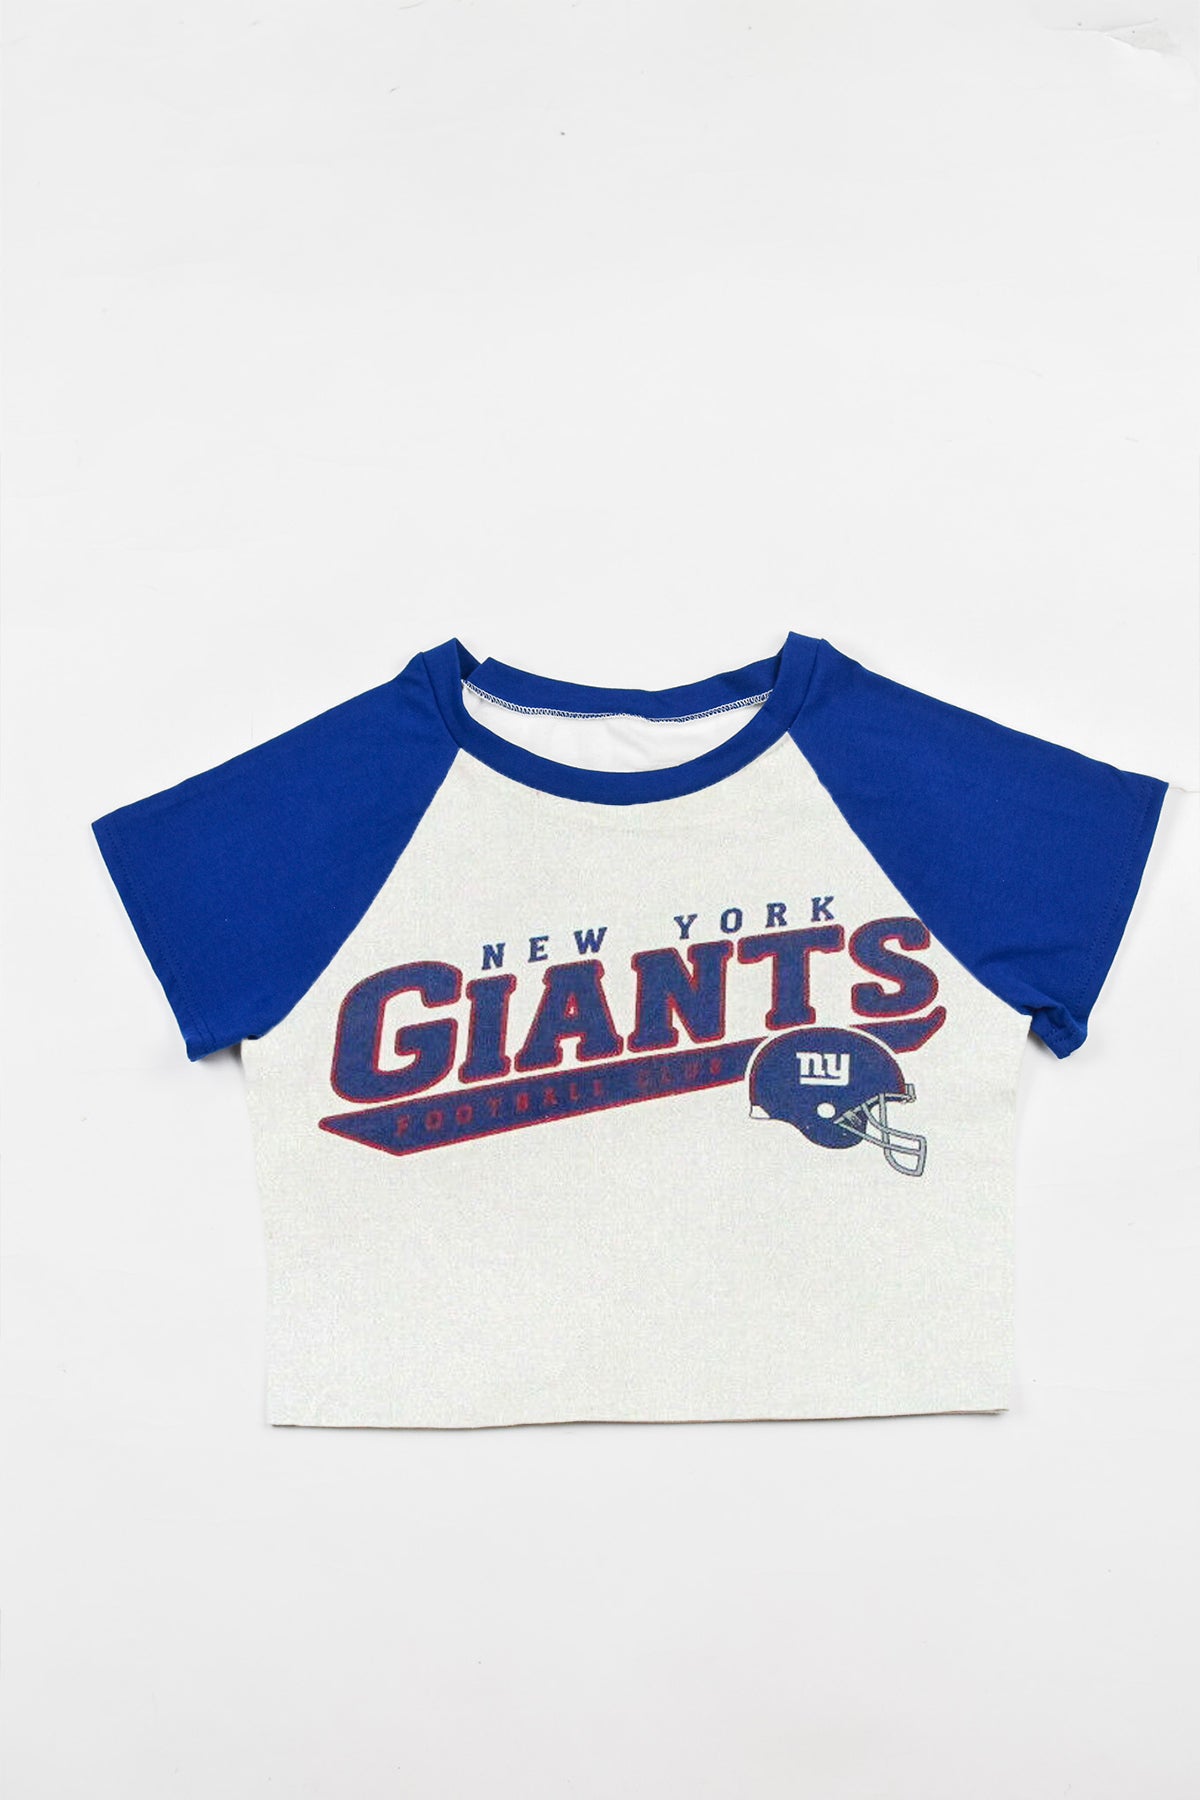 Upcycled Blue Jays Baby Tee - Tonguetied Apparel